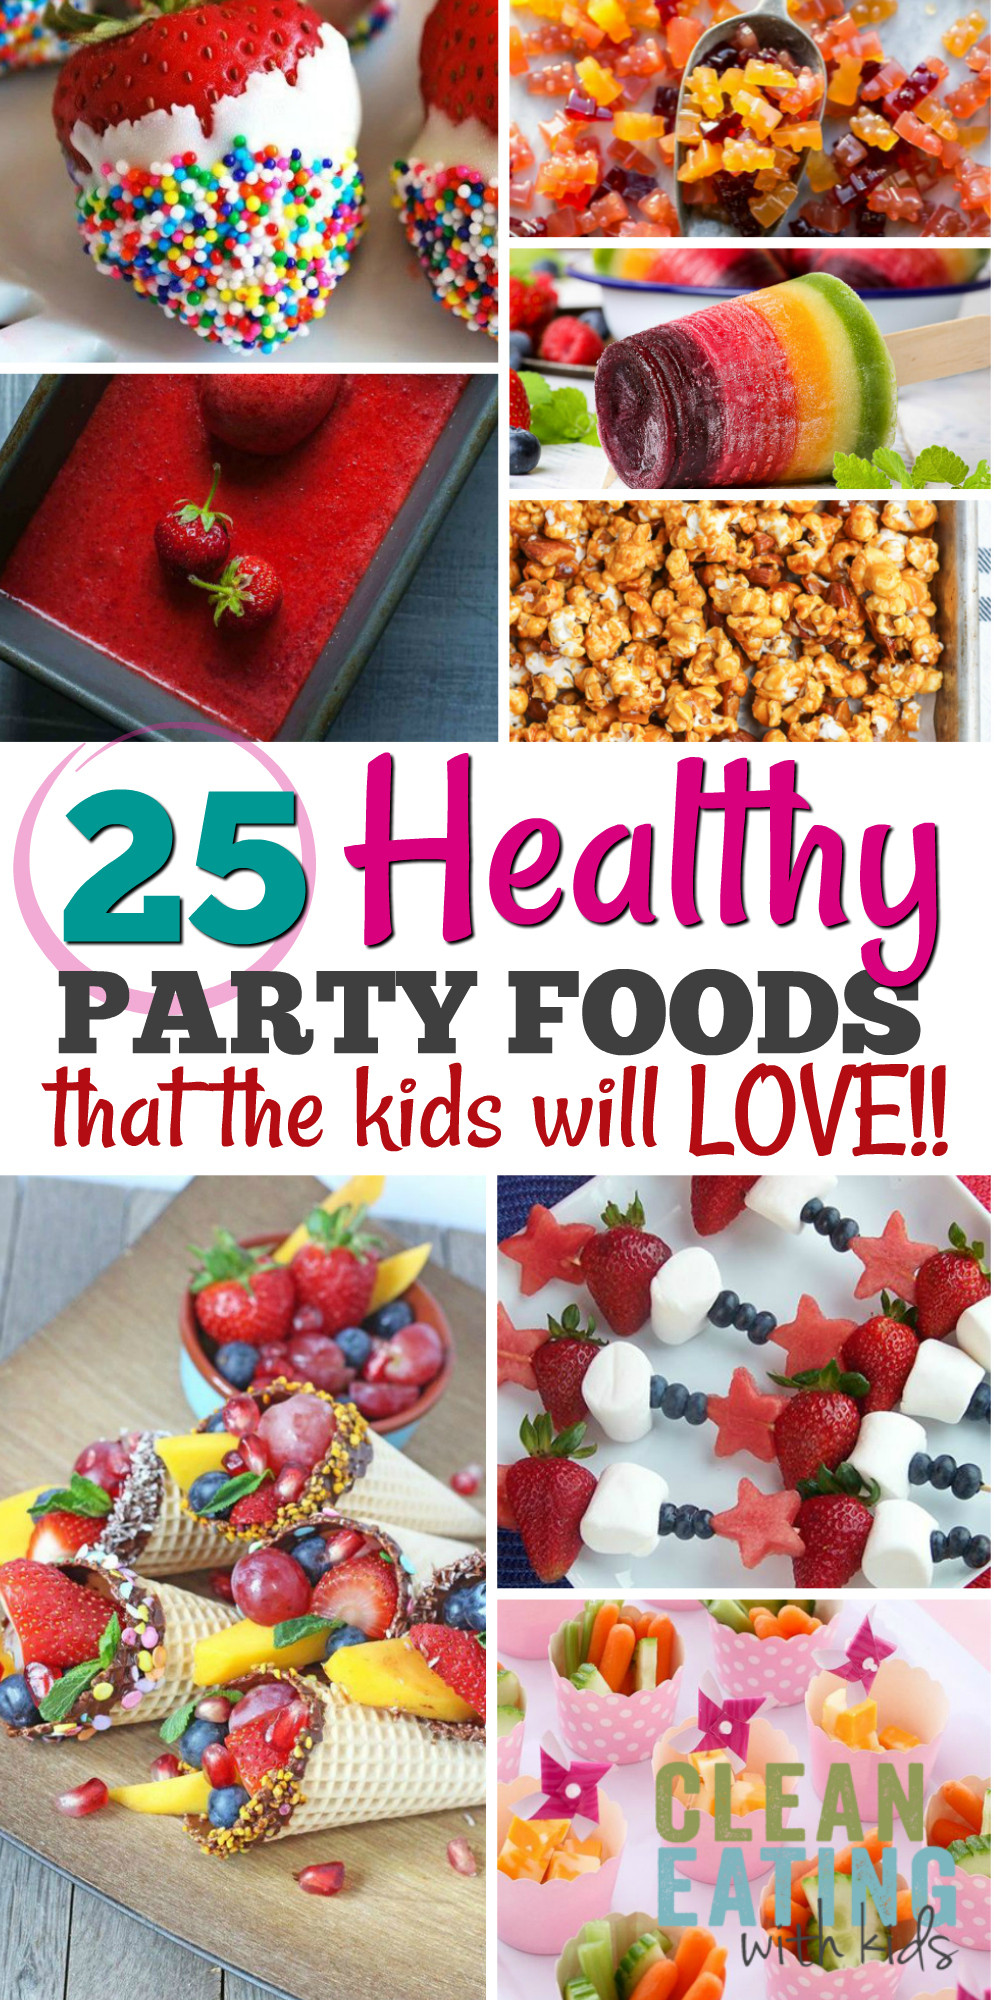 Toddler Party Food Ideas
 25 Healthy Birthday Party Food Ideas Clean Eating with kids